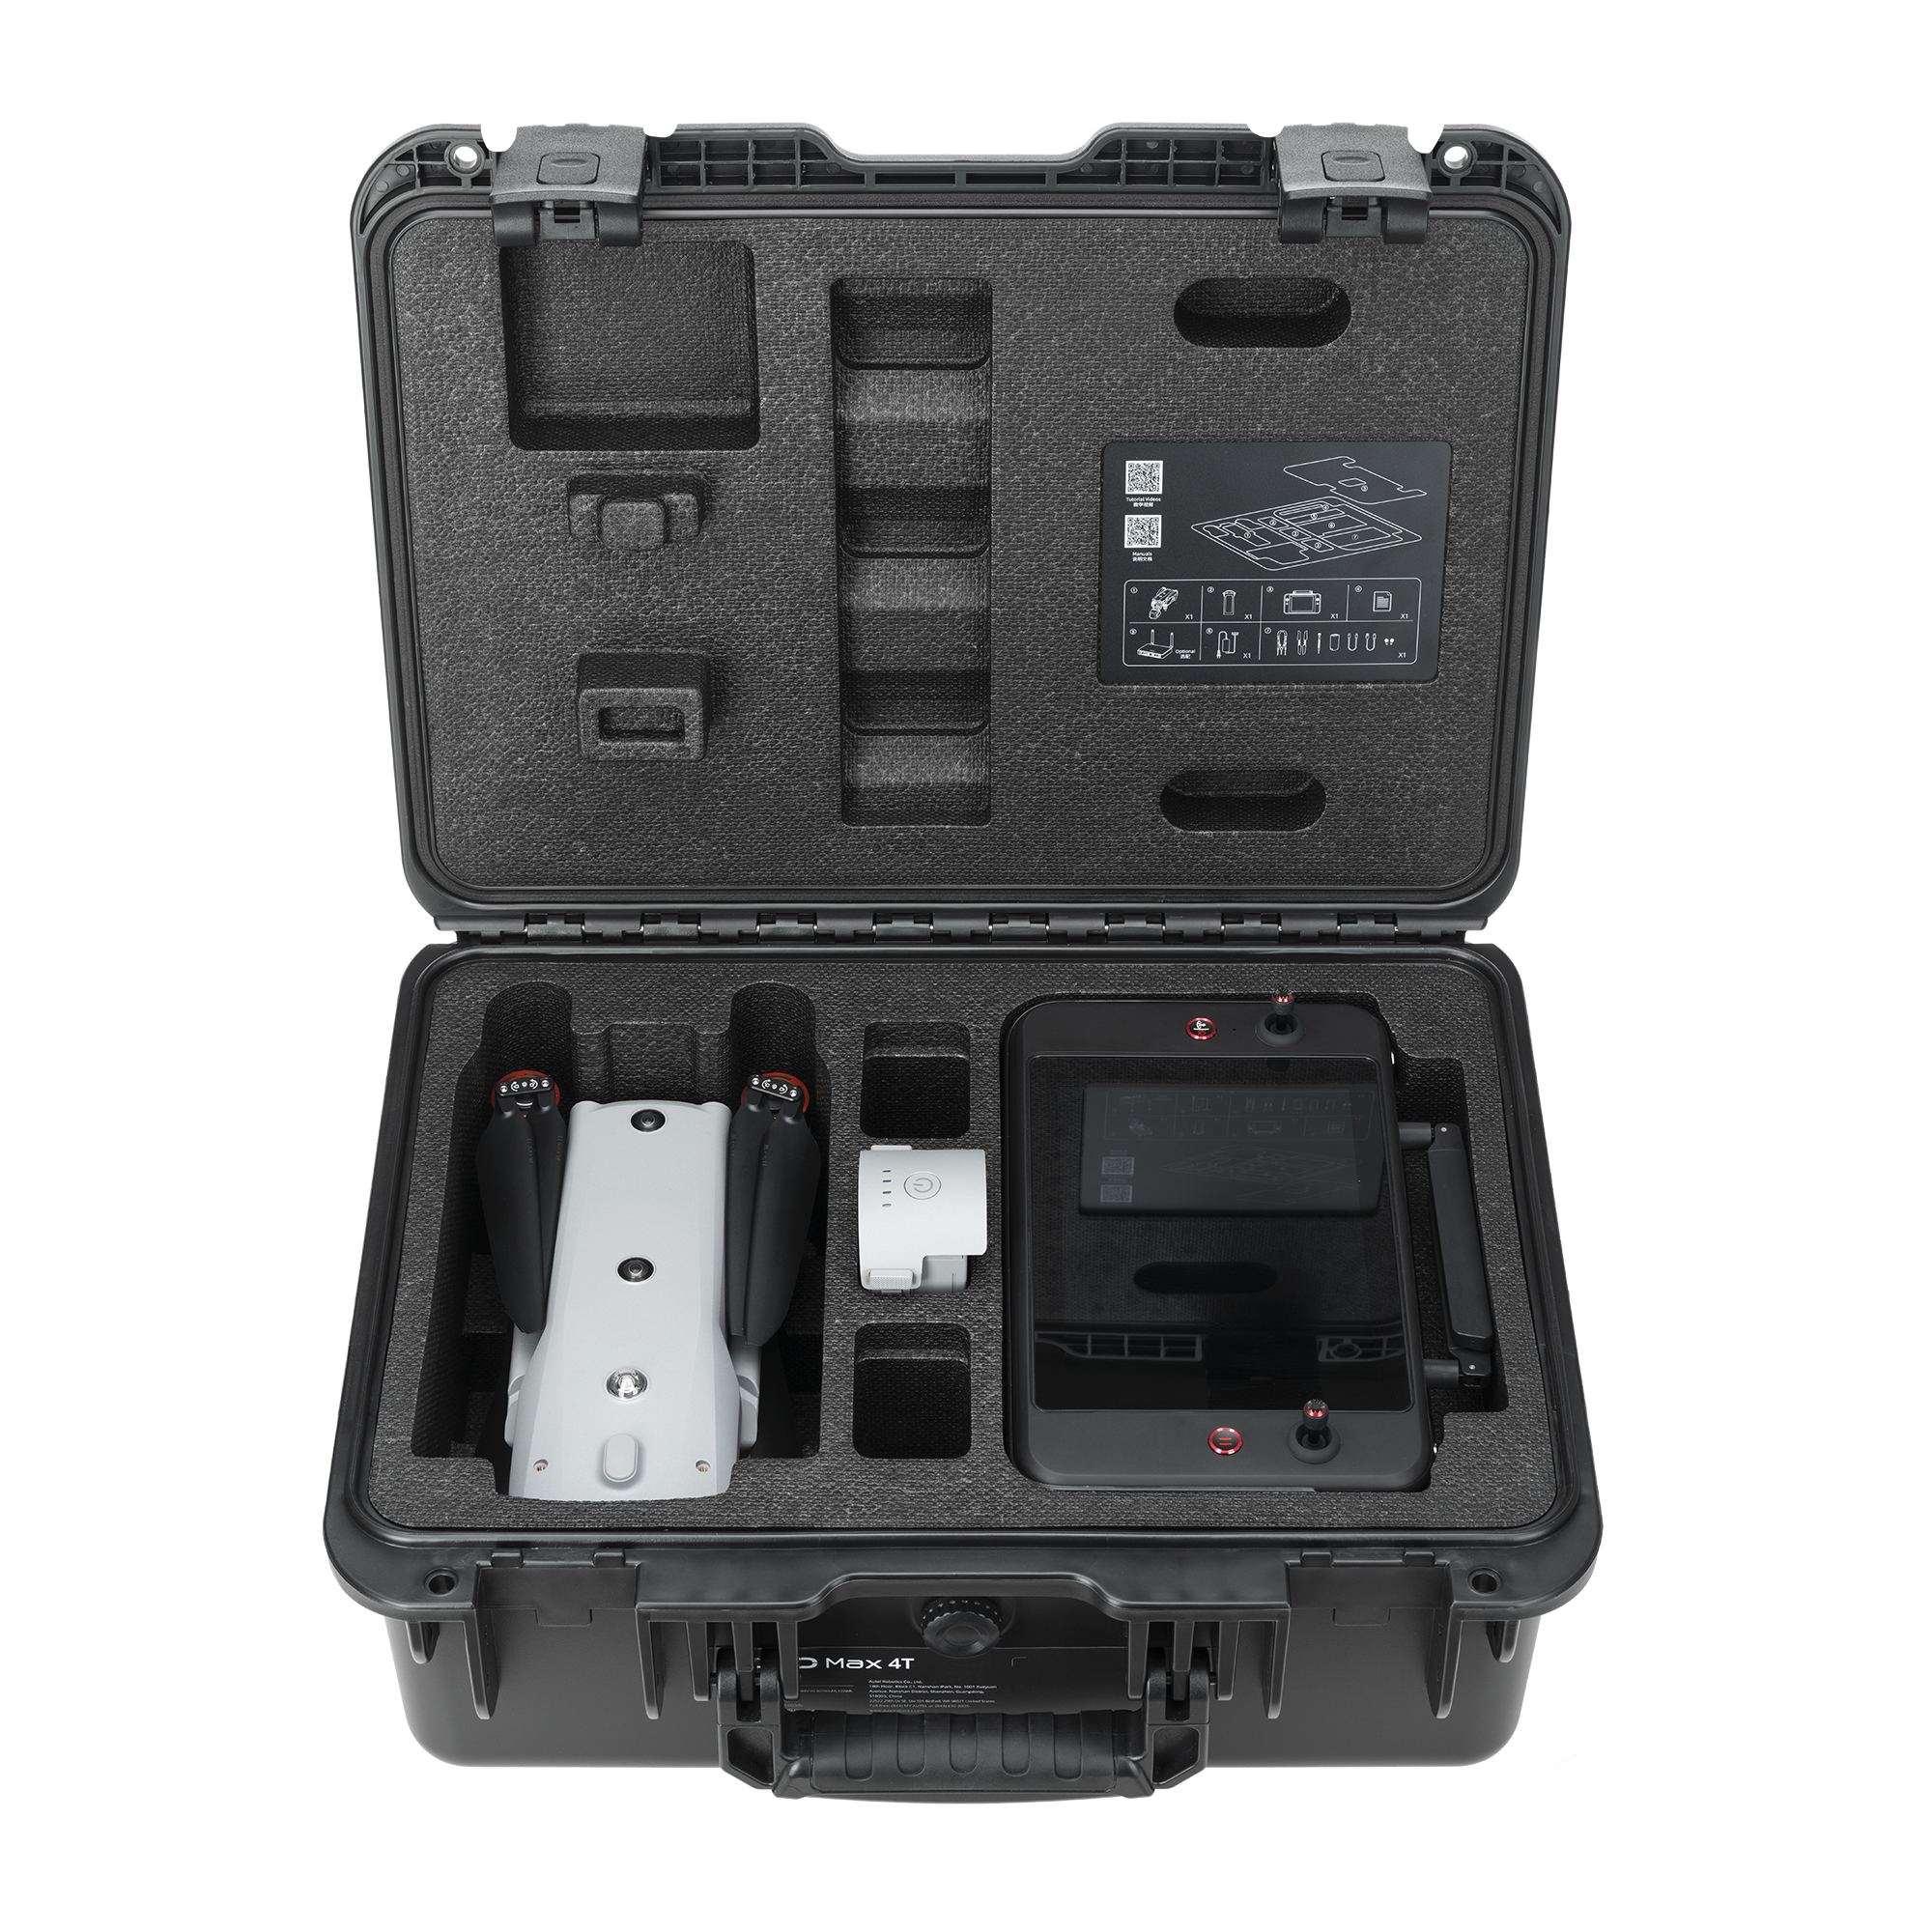 EVO Max 4T_Rugged Case_Battery Together_Inside_002